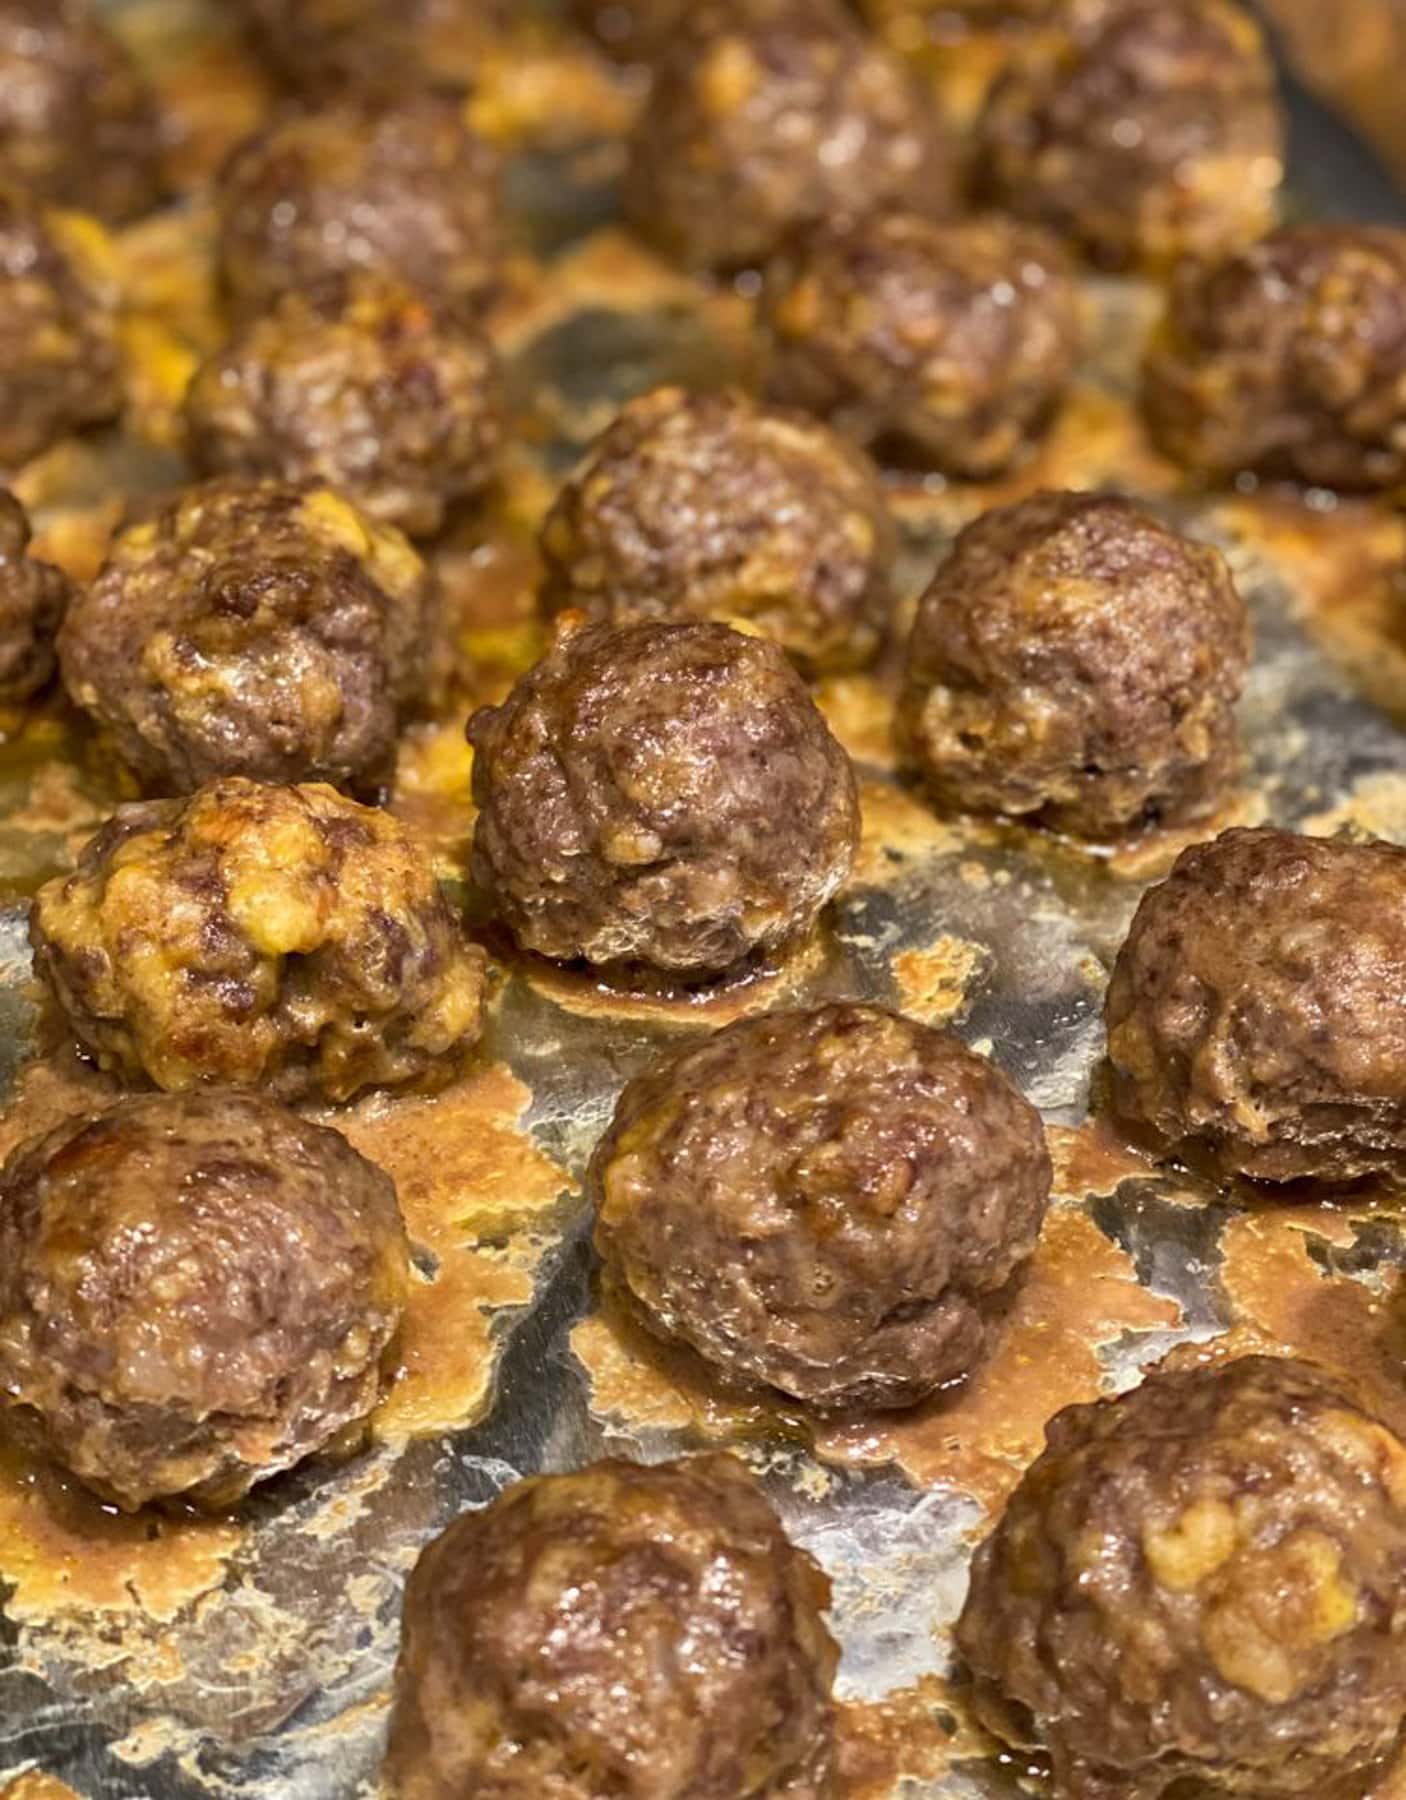 Cooked meatballs showing melted cheese.